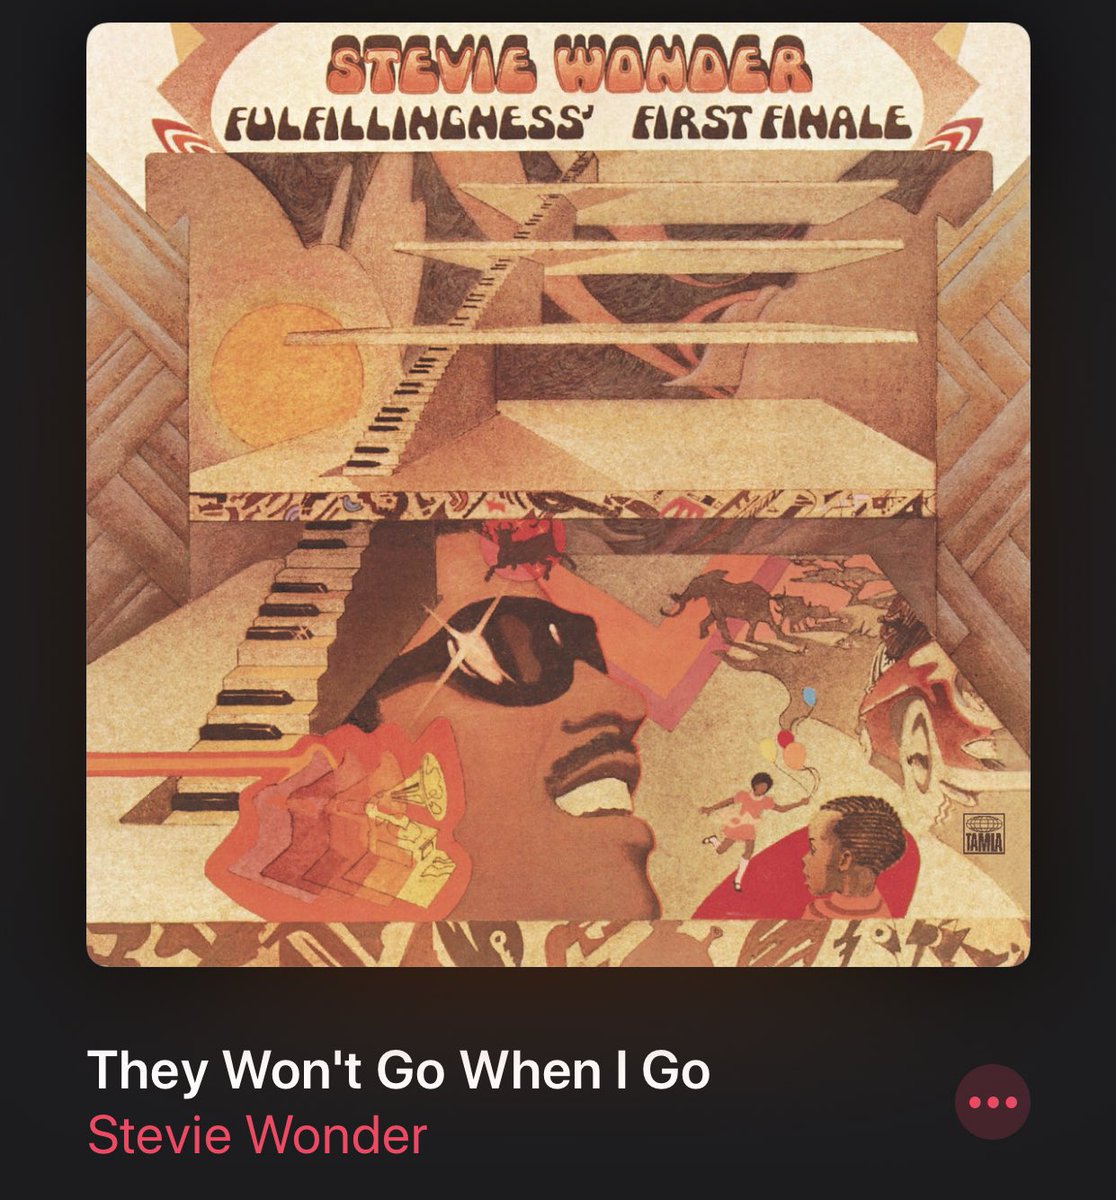 Y’all ready for my Stevie Wonder thread?I’ll begin with “They Won’t Go When I Go”. It’s dramatic and emotional. About ones death and heavenly return. The vocals have so much depth. Perfectly written. A perfect song.